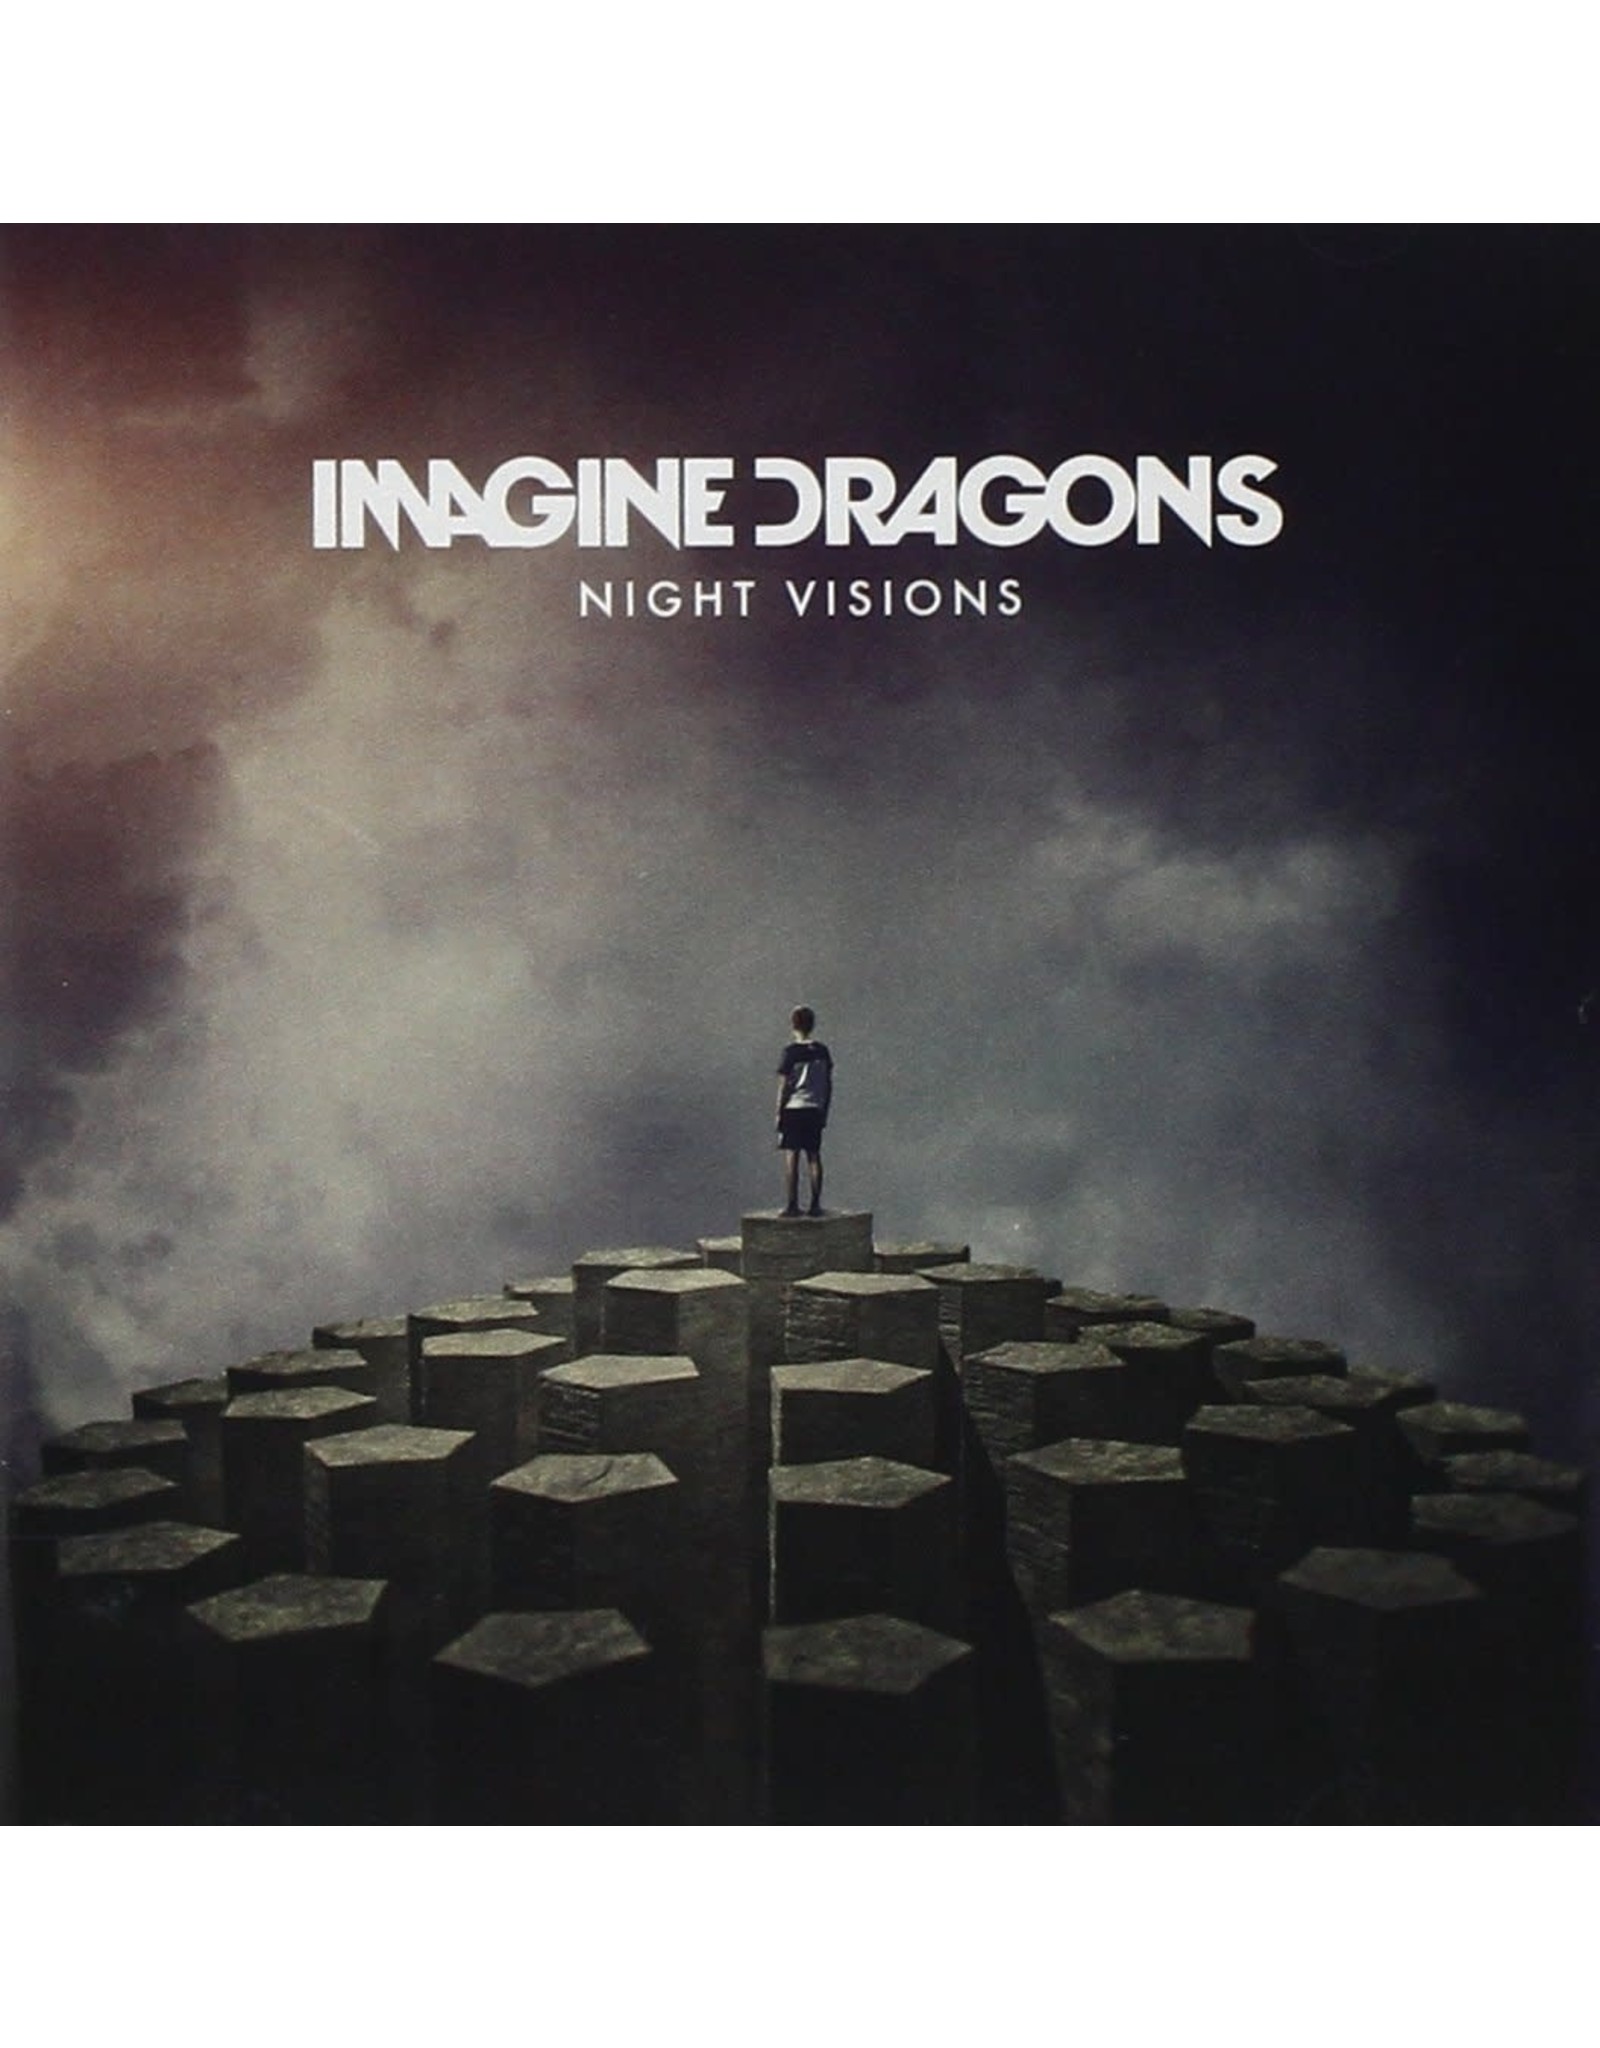 Imagine Dragons - Night Visions (10th Anniversary) [Deluxe Edition]